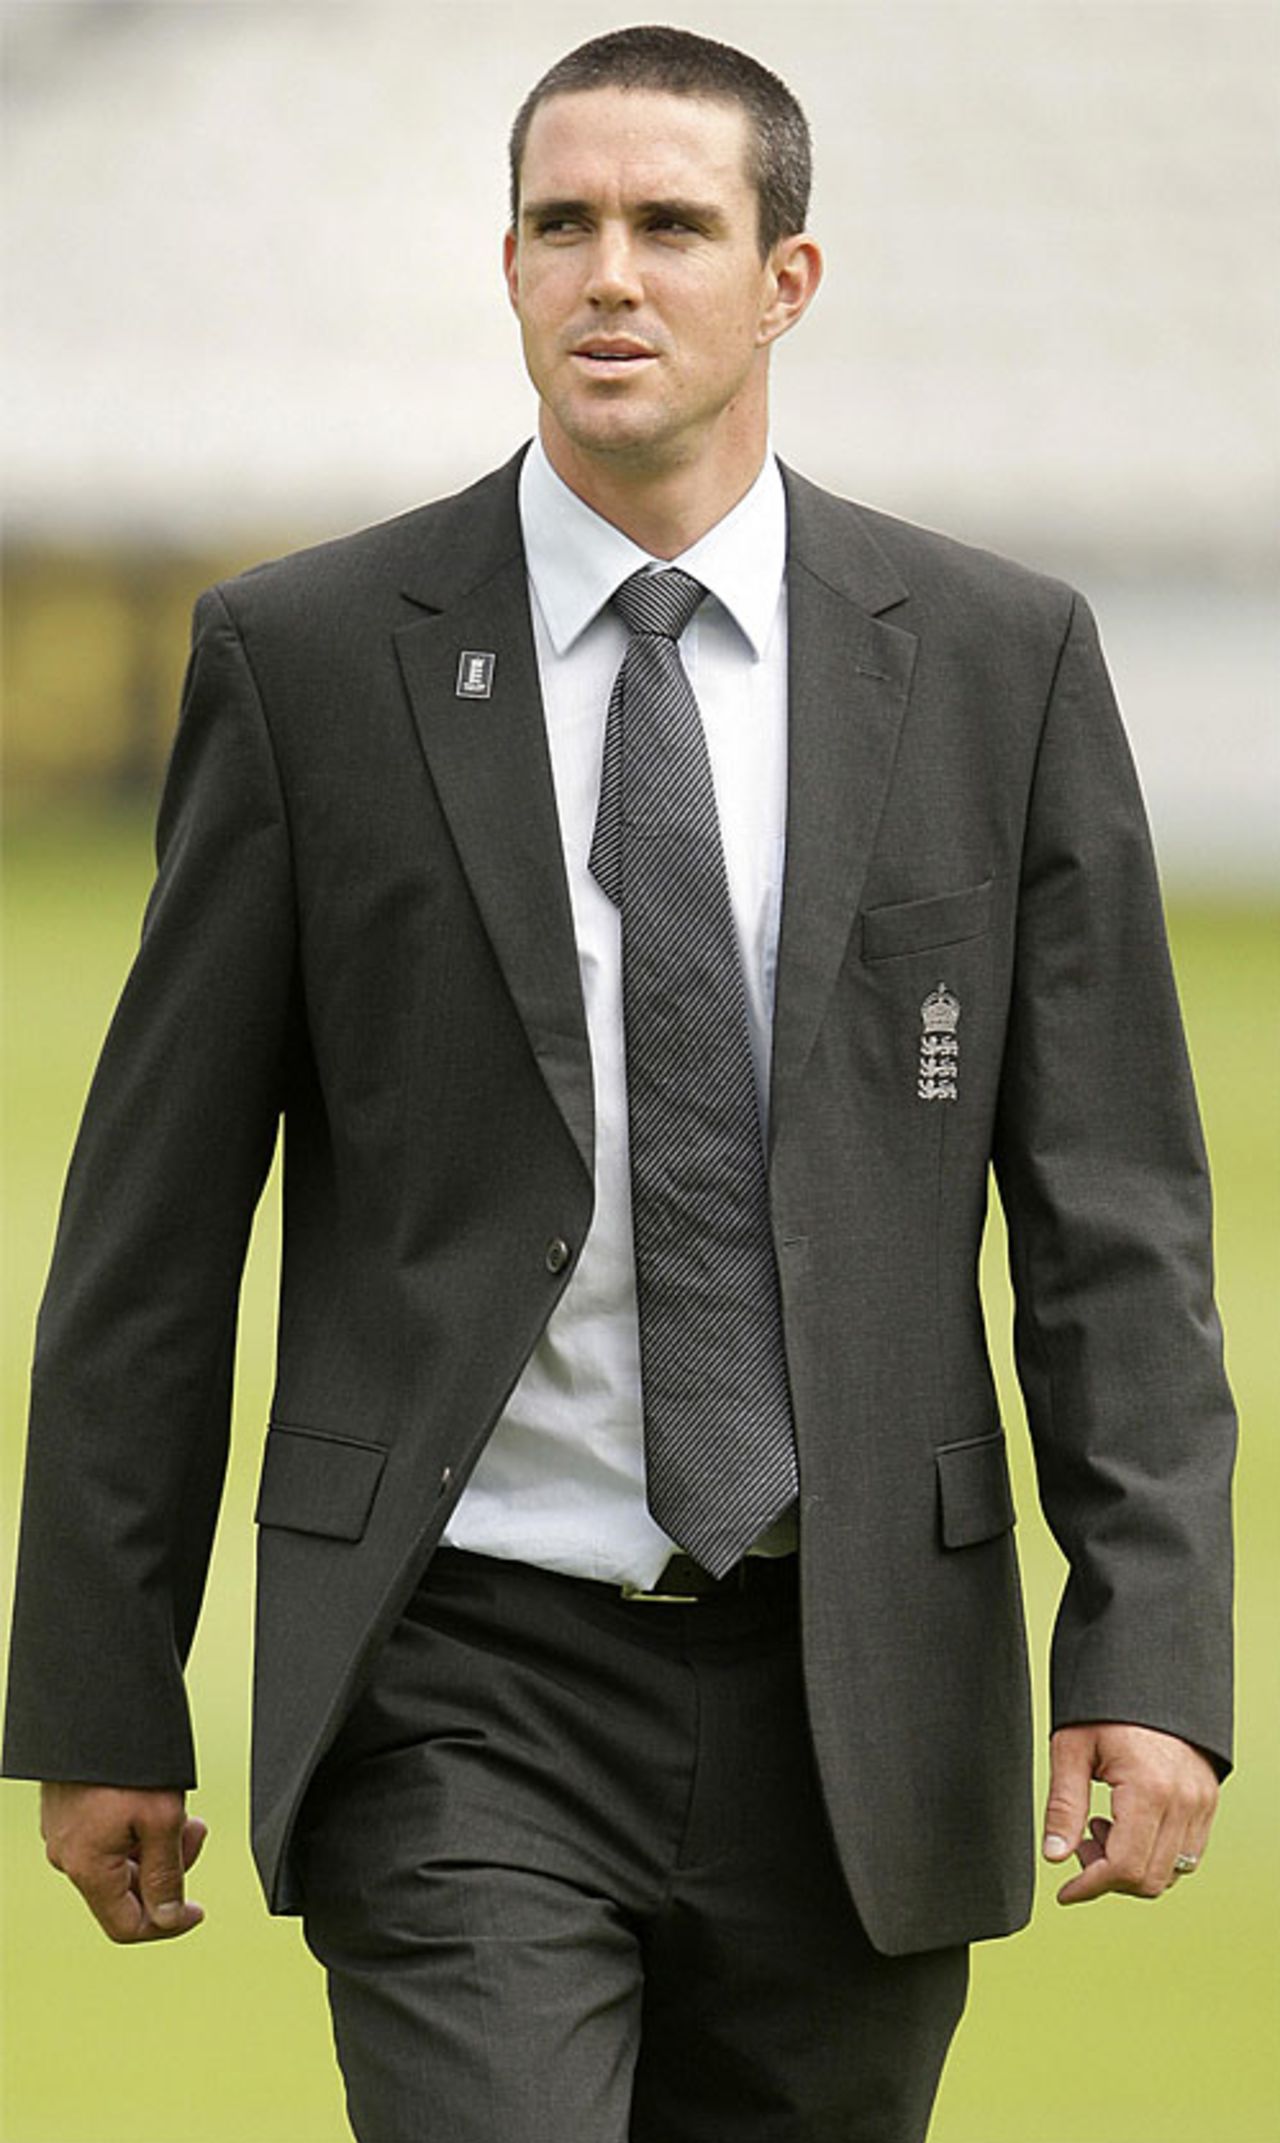 Kevin Pietersen strides into office, Lord's, August 4, 2008 